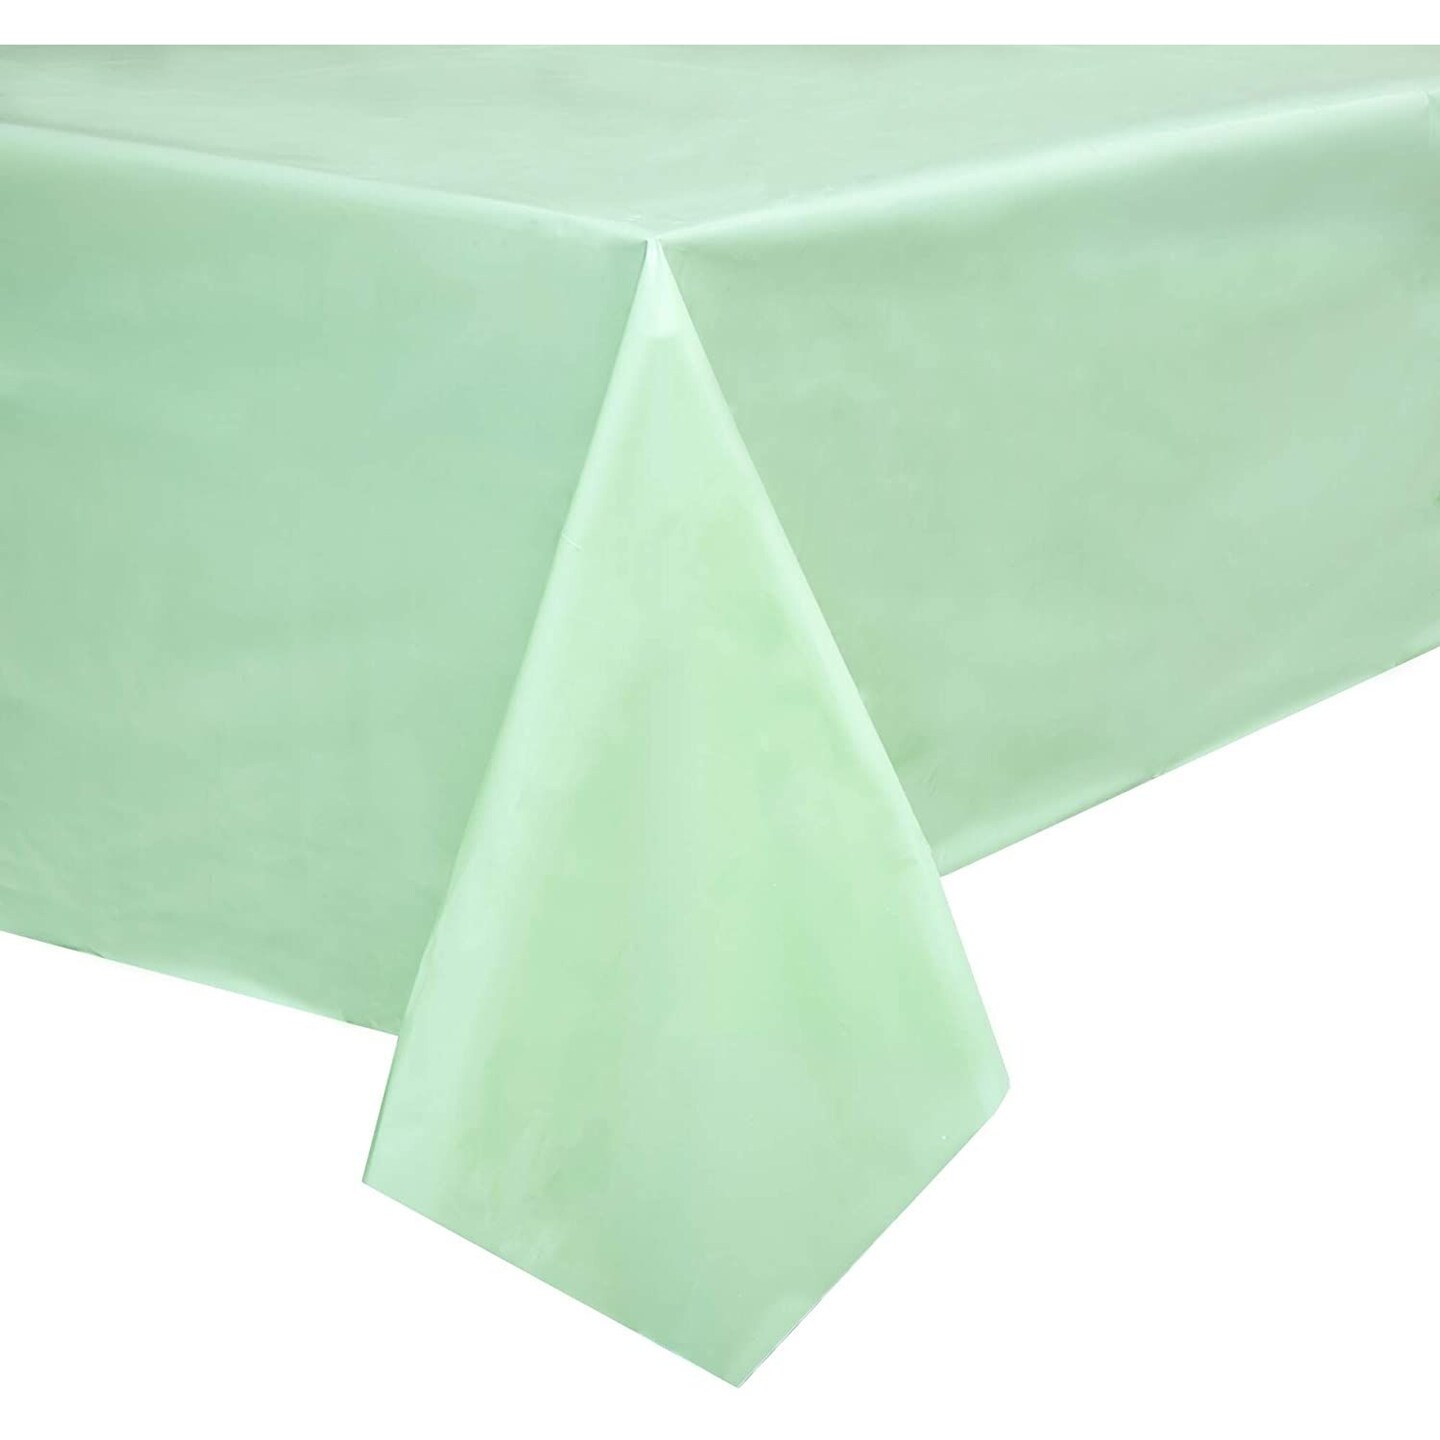 Sparkle and Bash Mint Green Plastic Rectangle Party Table Cloth Cover (3 Pack)